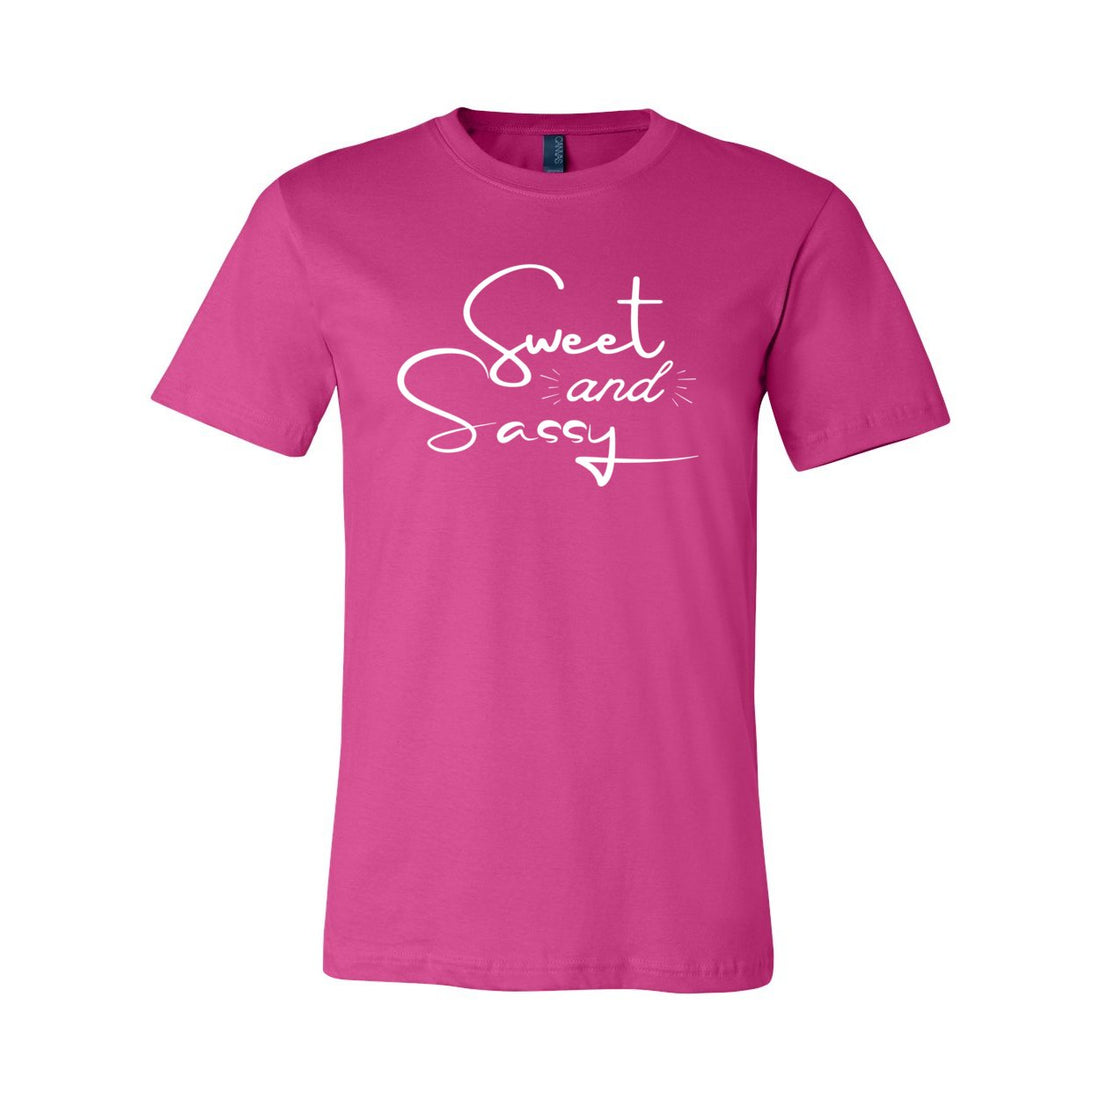 Sweet N Sassy Jersey Tee - T-Shirts - Positively Sassy - Sweet N Sassy Jersey Tee